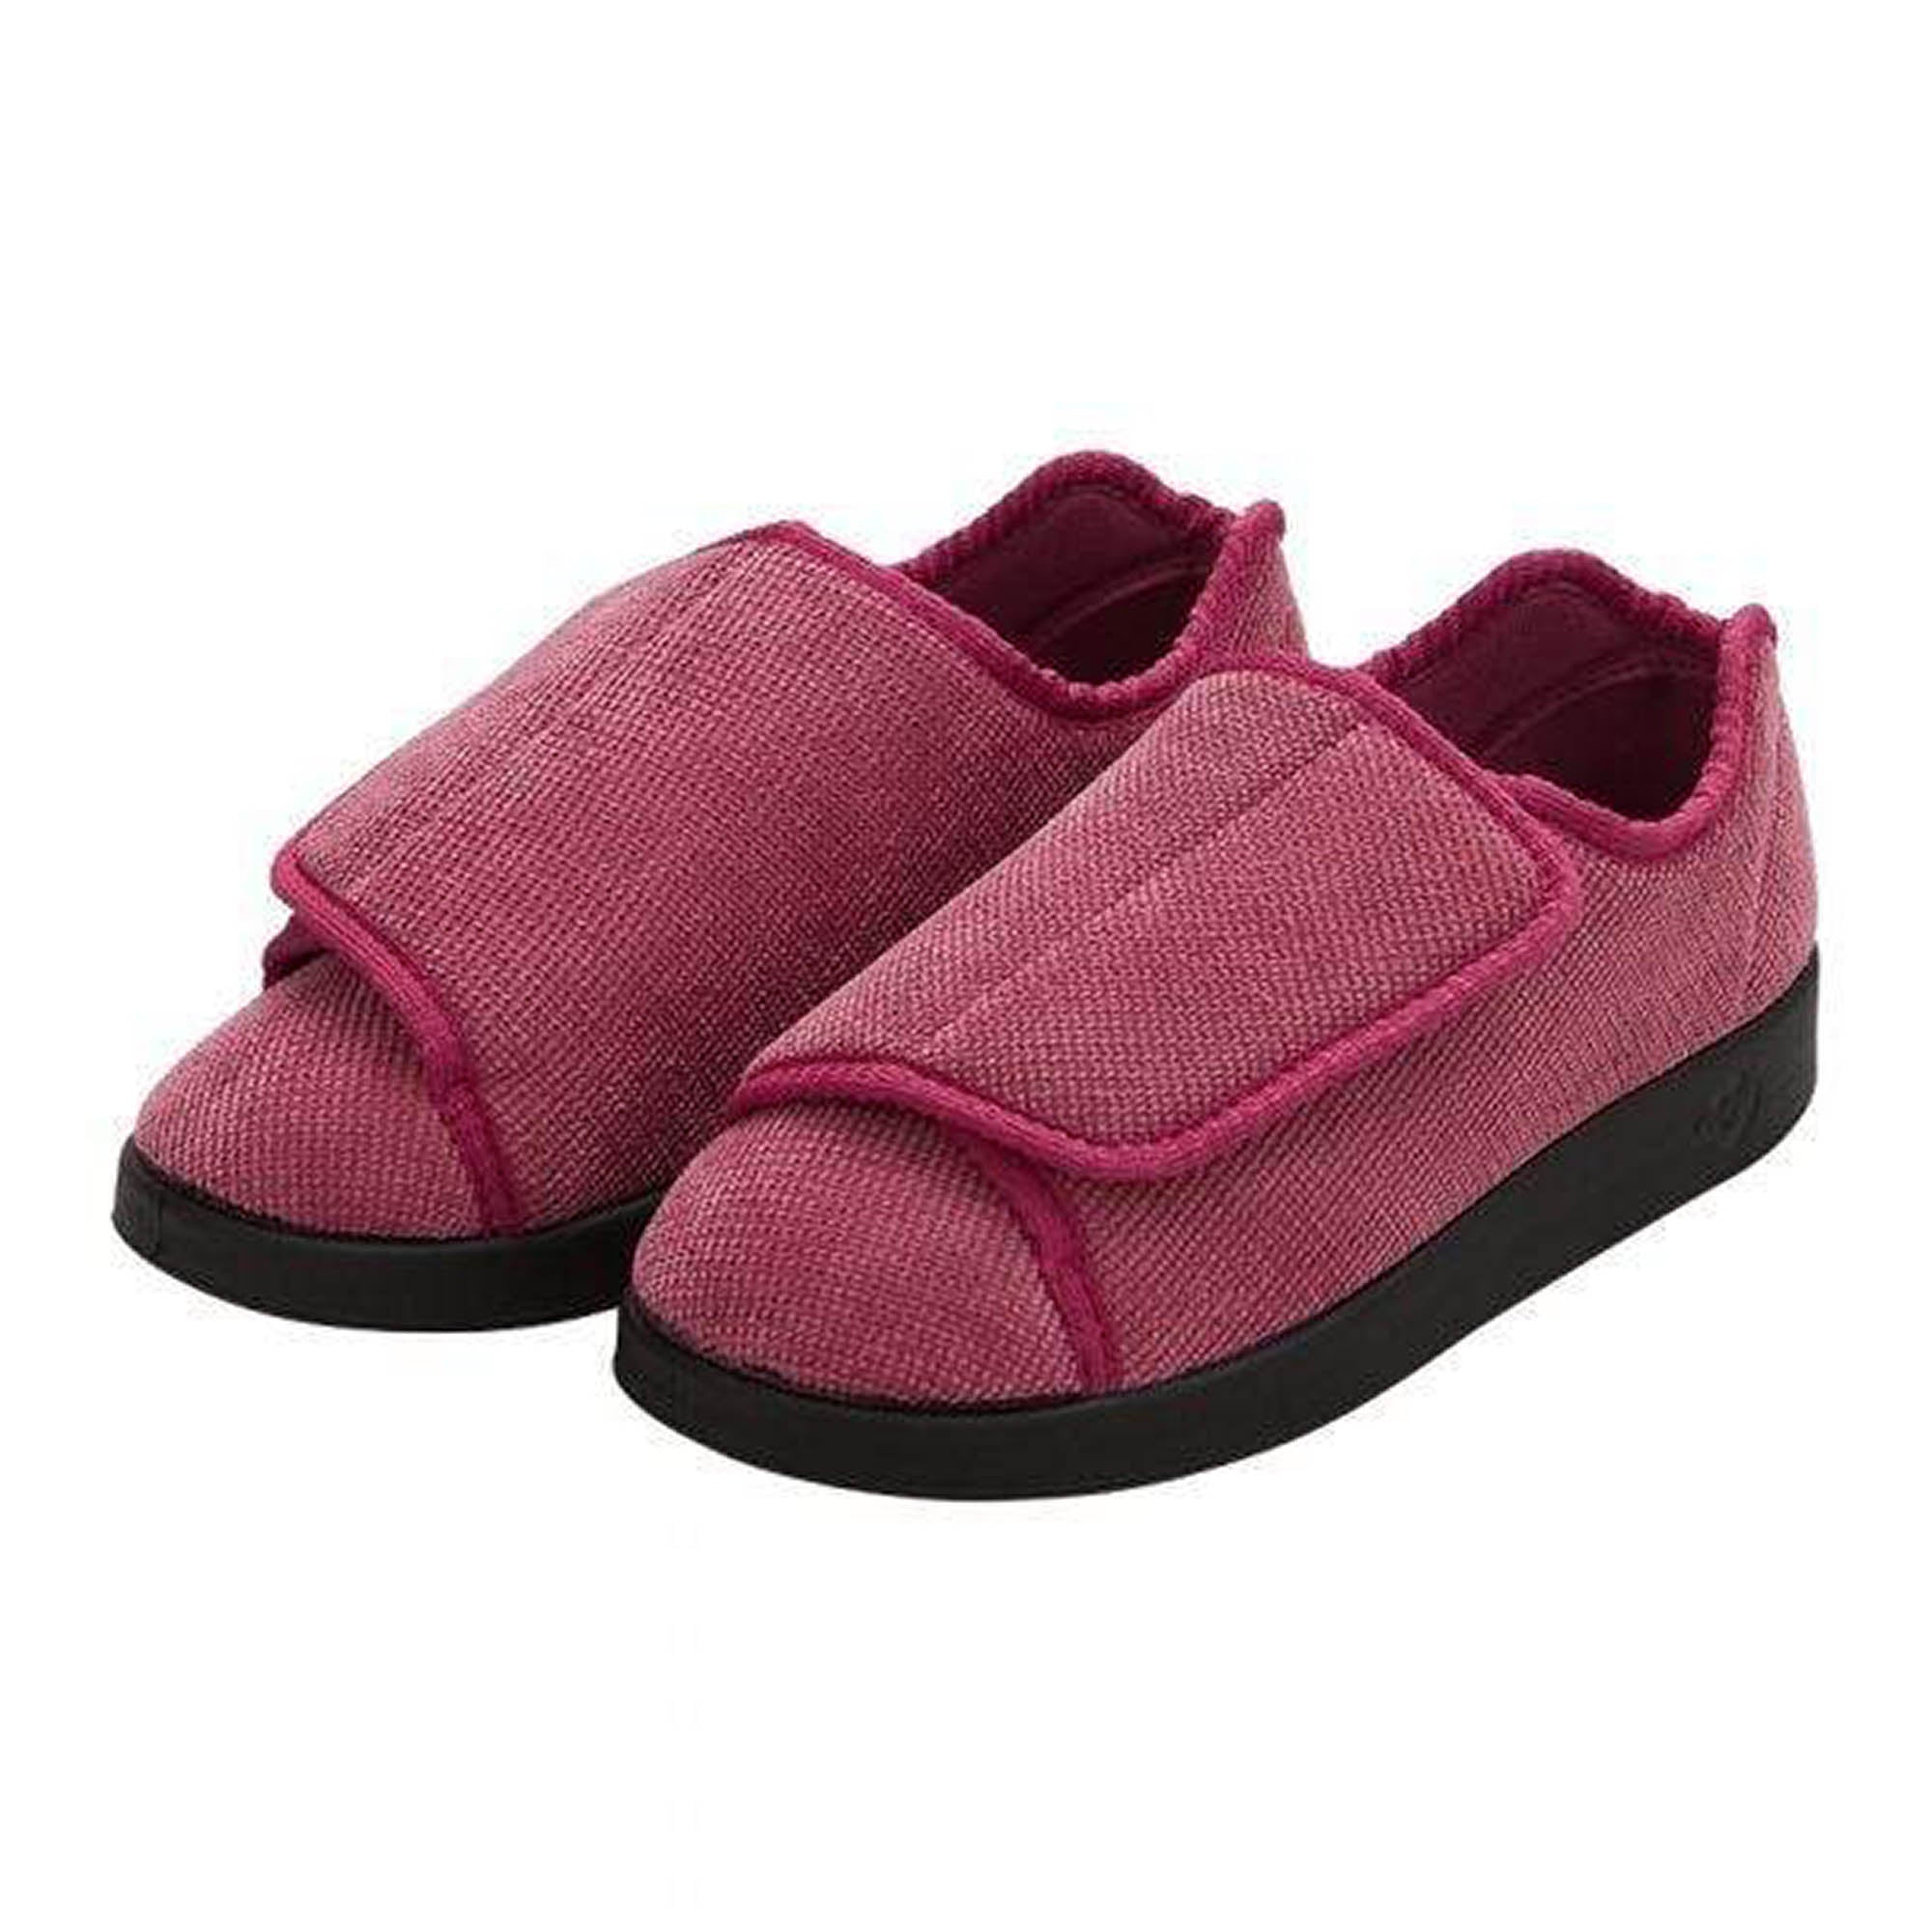 Silverts Women's Antimicrobial Extra Extra Wide Easy-Closure Slippers - Dusty Rose - 7